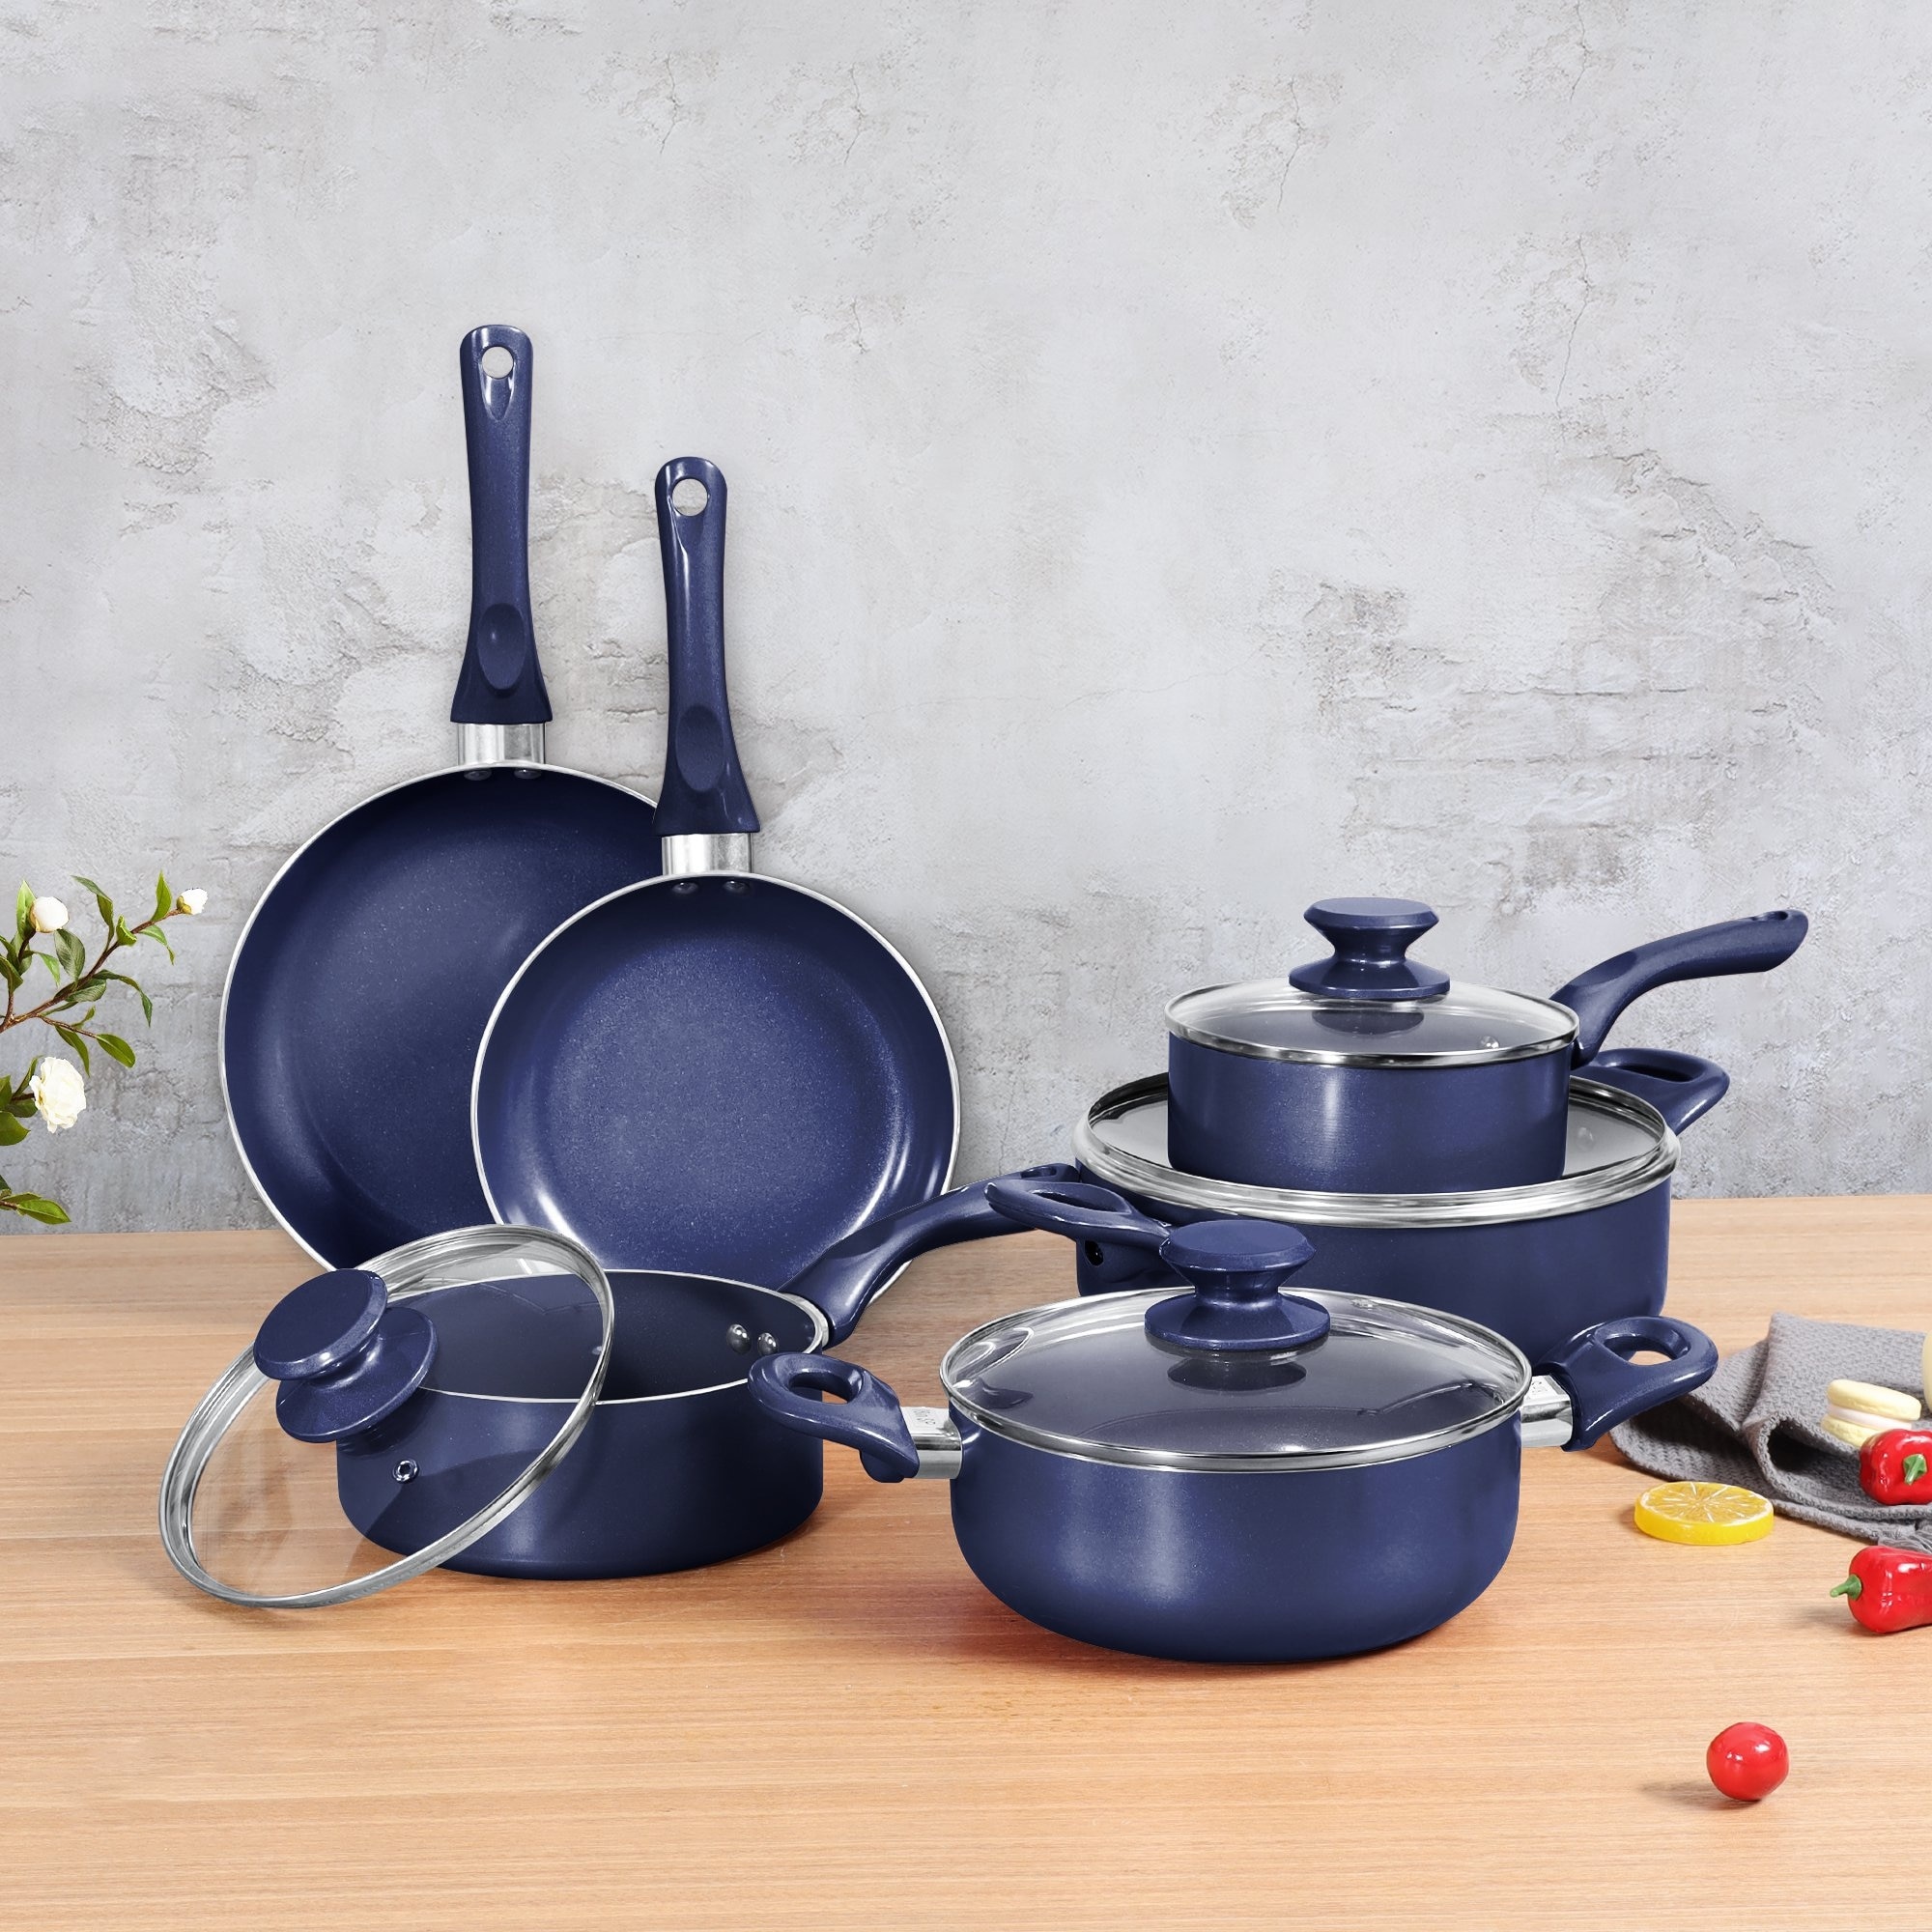 https://ak1.ostkcdn.com/images/products/is/images/direct/2a1cf596dee797c0b87714b7767f062eb31c0f0f/10-Piece-Ceramic-Nonstick-Aluminum-Cookware-Set.jpg